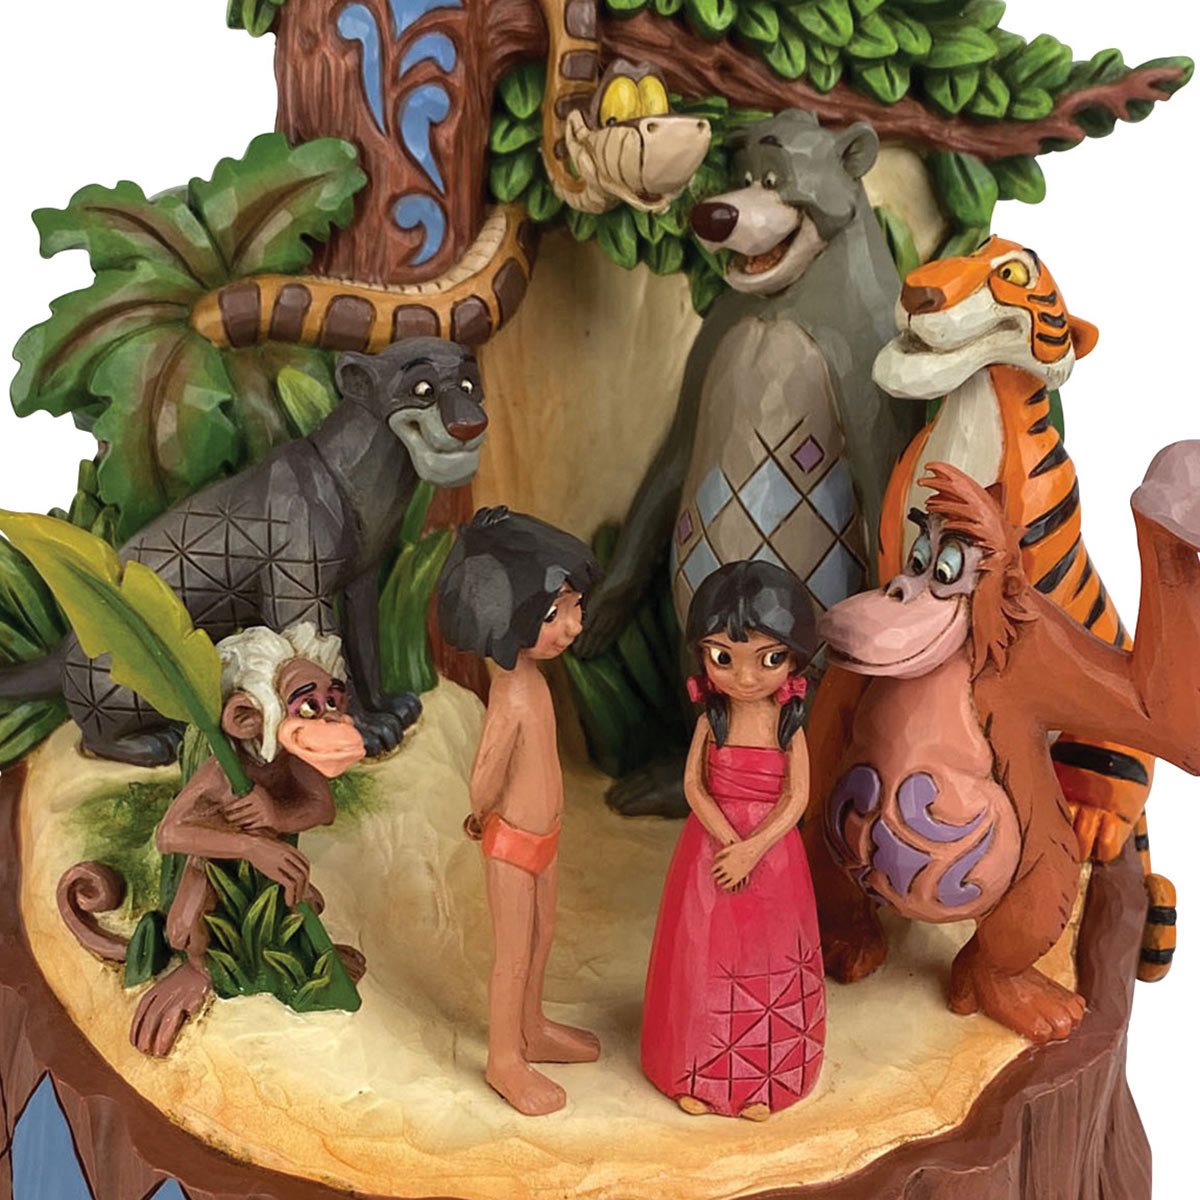 Enesco Disney Traditions Carved by Heart Jungle Book Statue